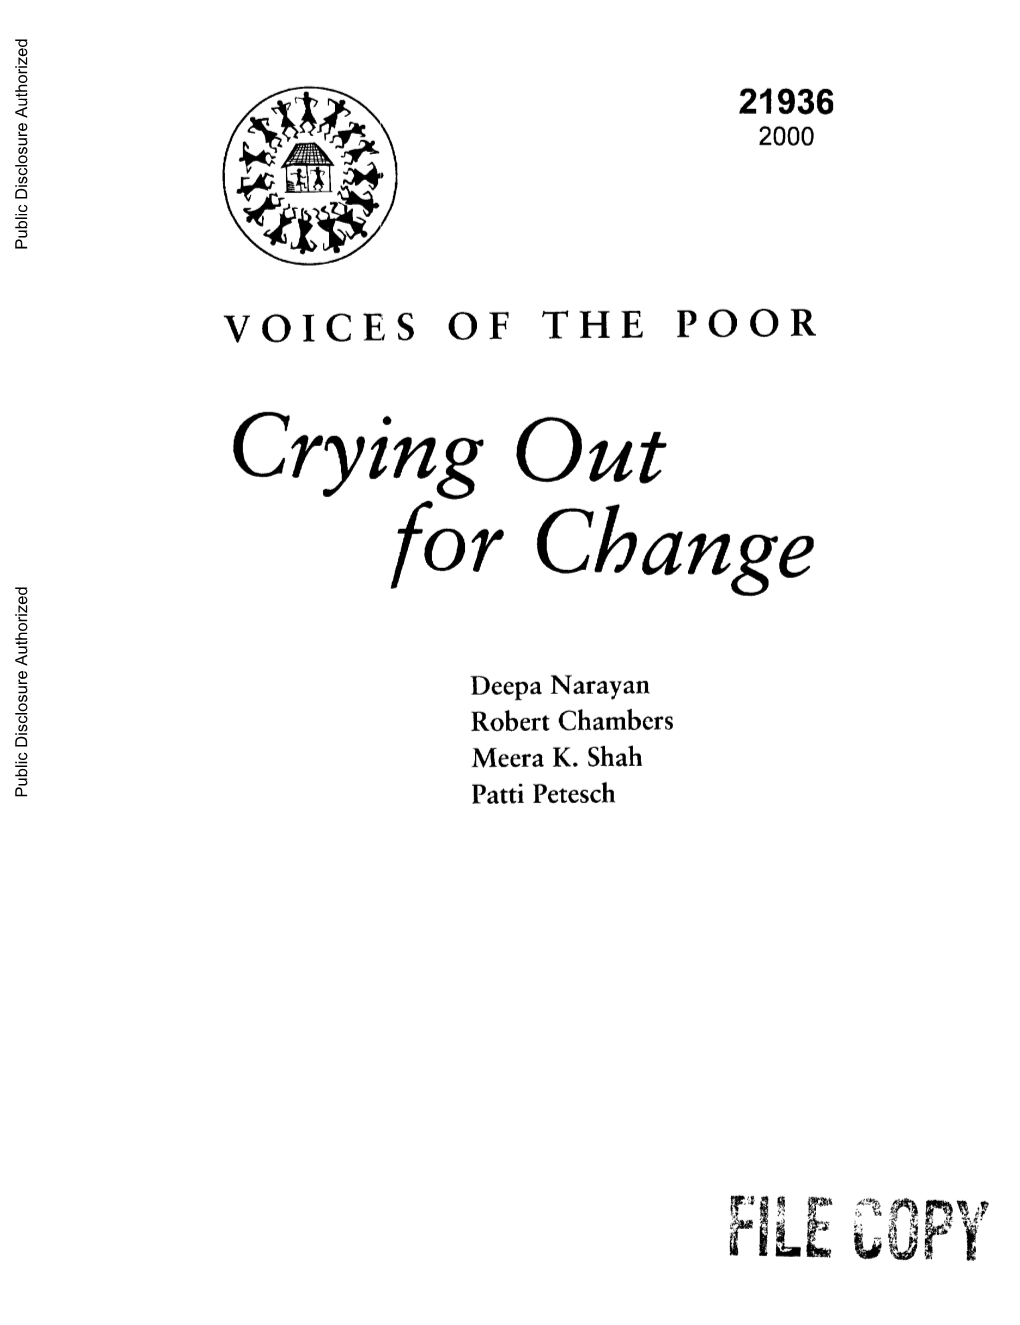 Crying out for Change